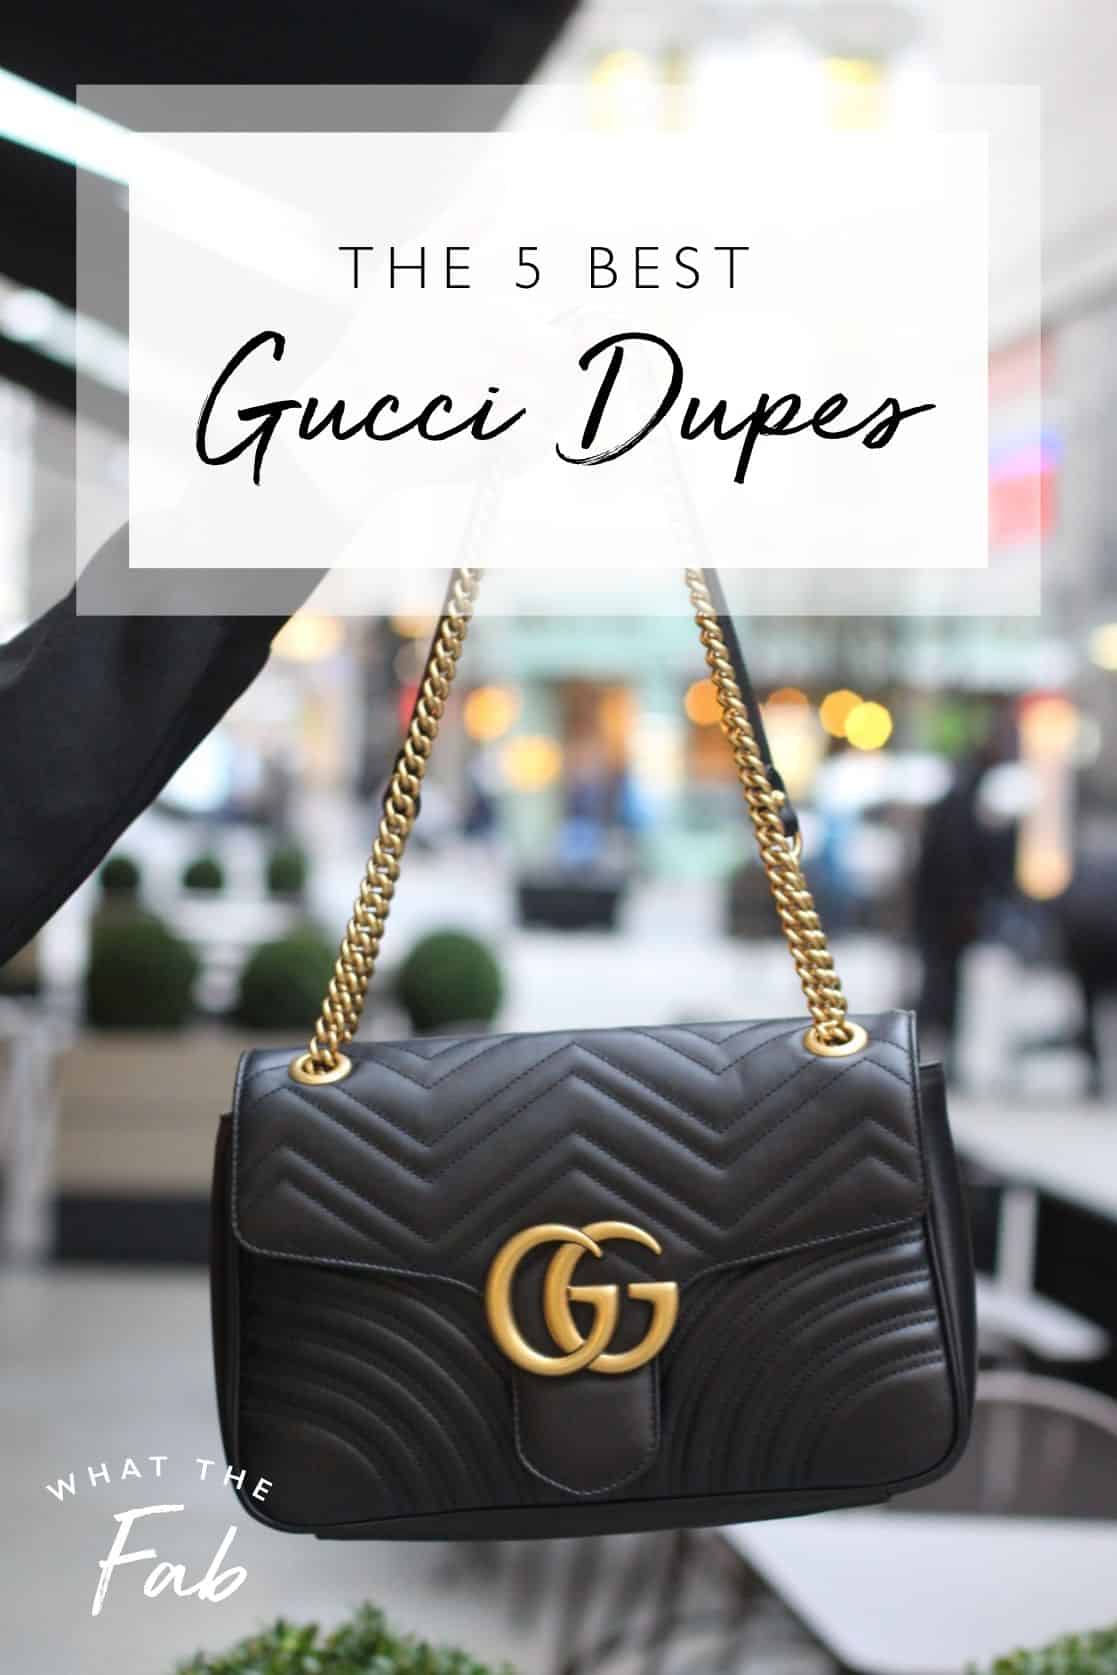 The Best Gucci Dupes, by fashion blogger What The Fab